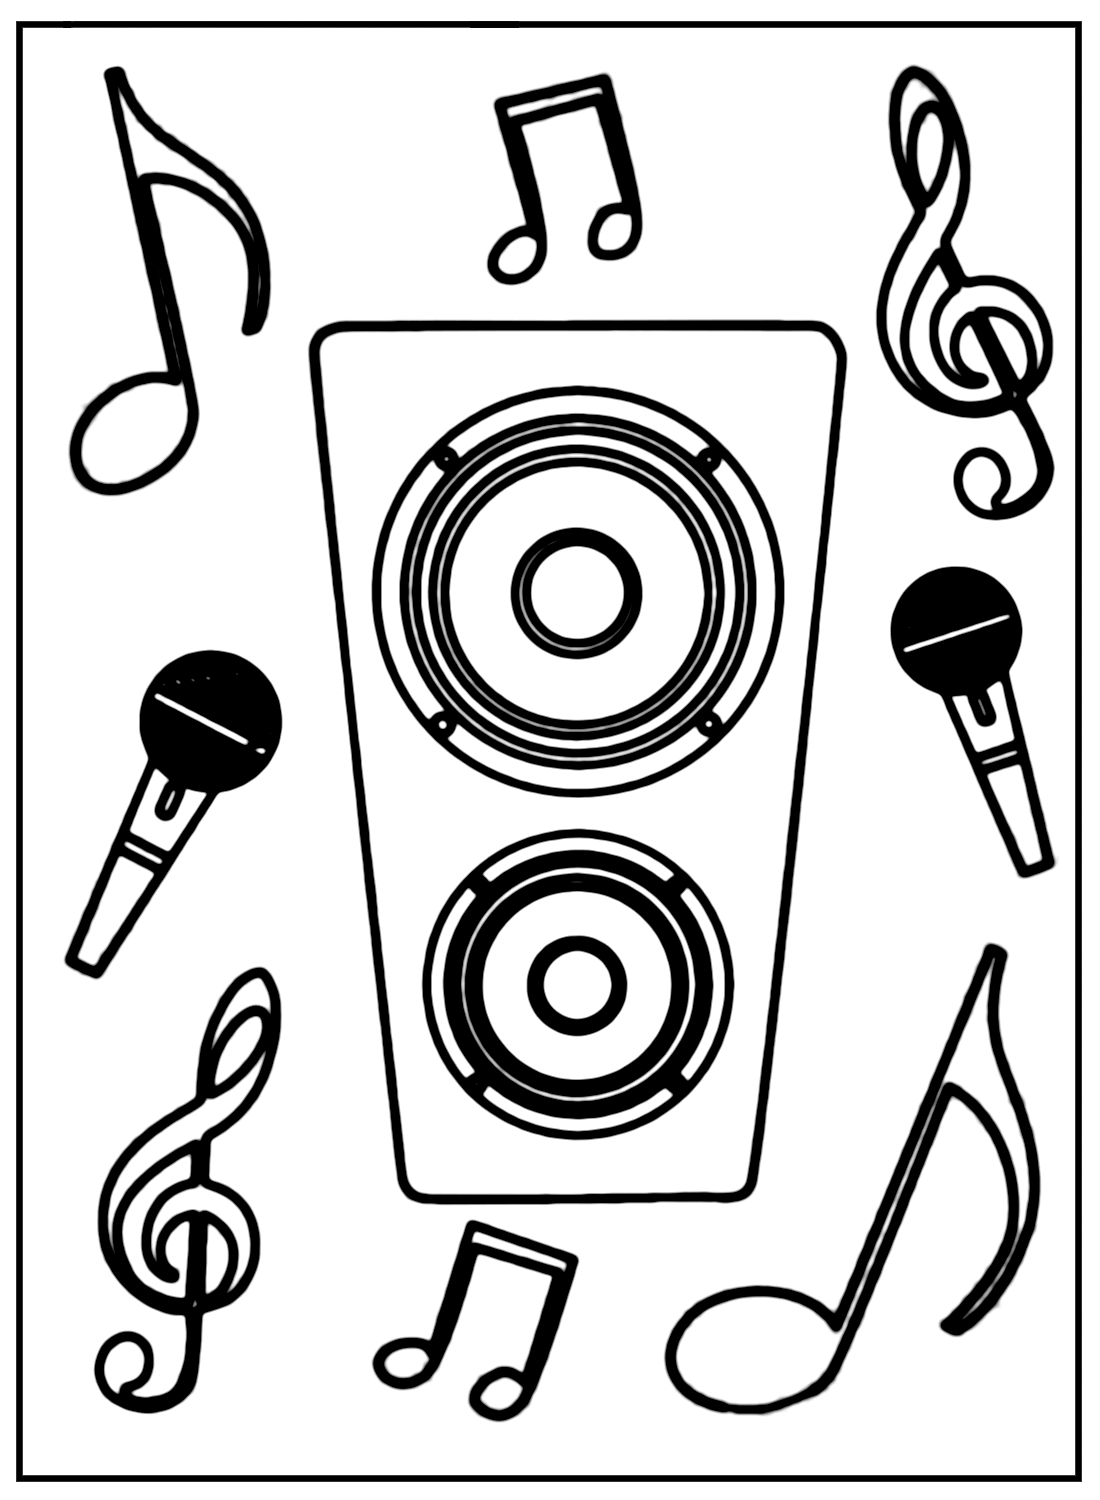 Music Column and Notes Image Coloring Page